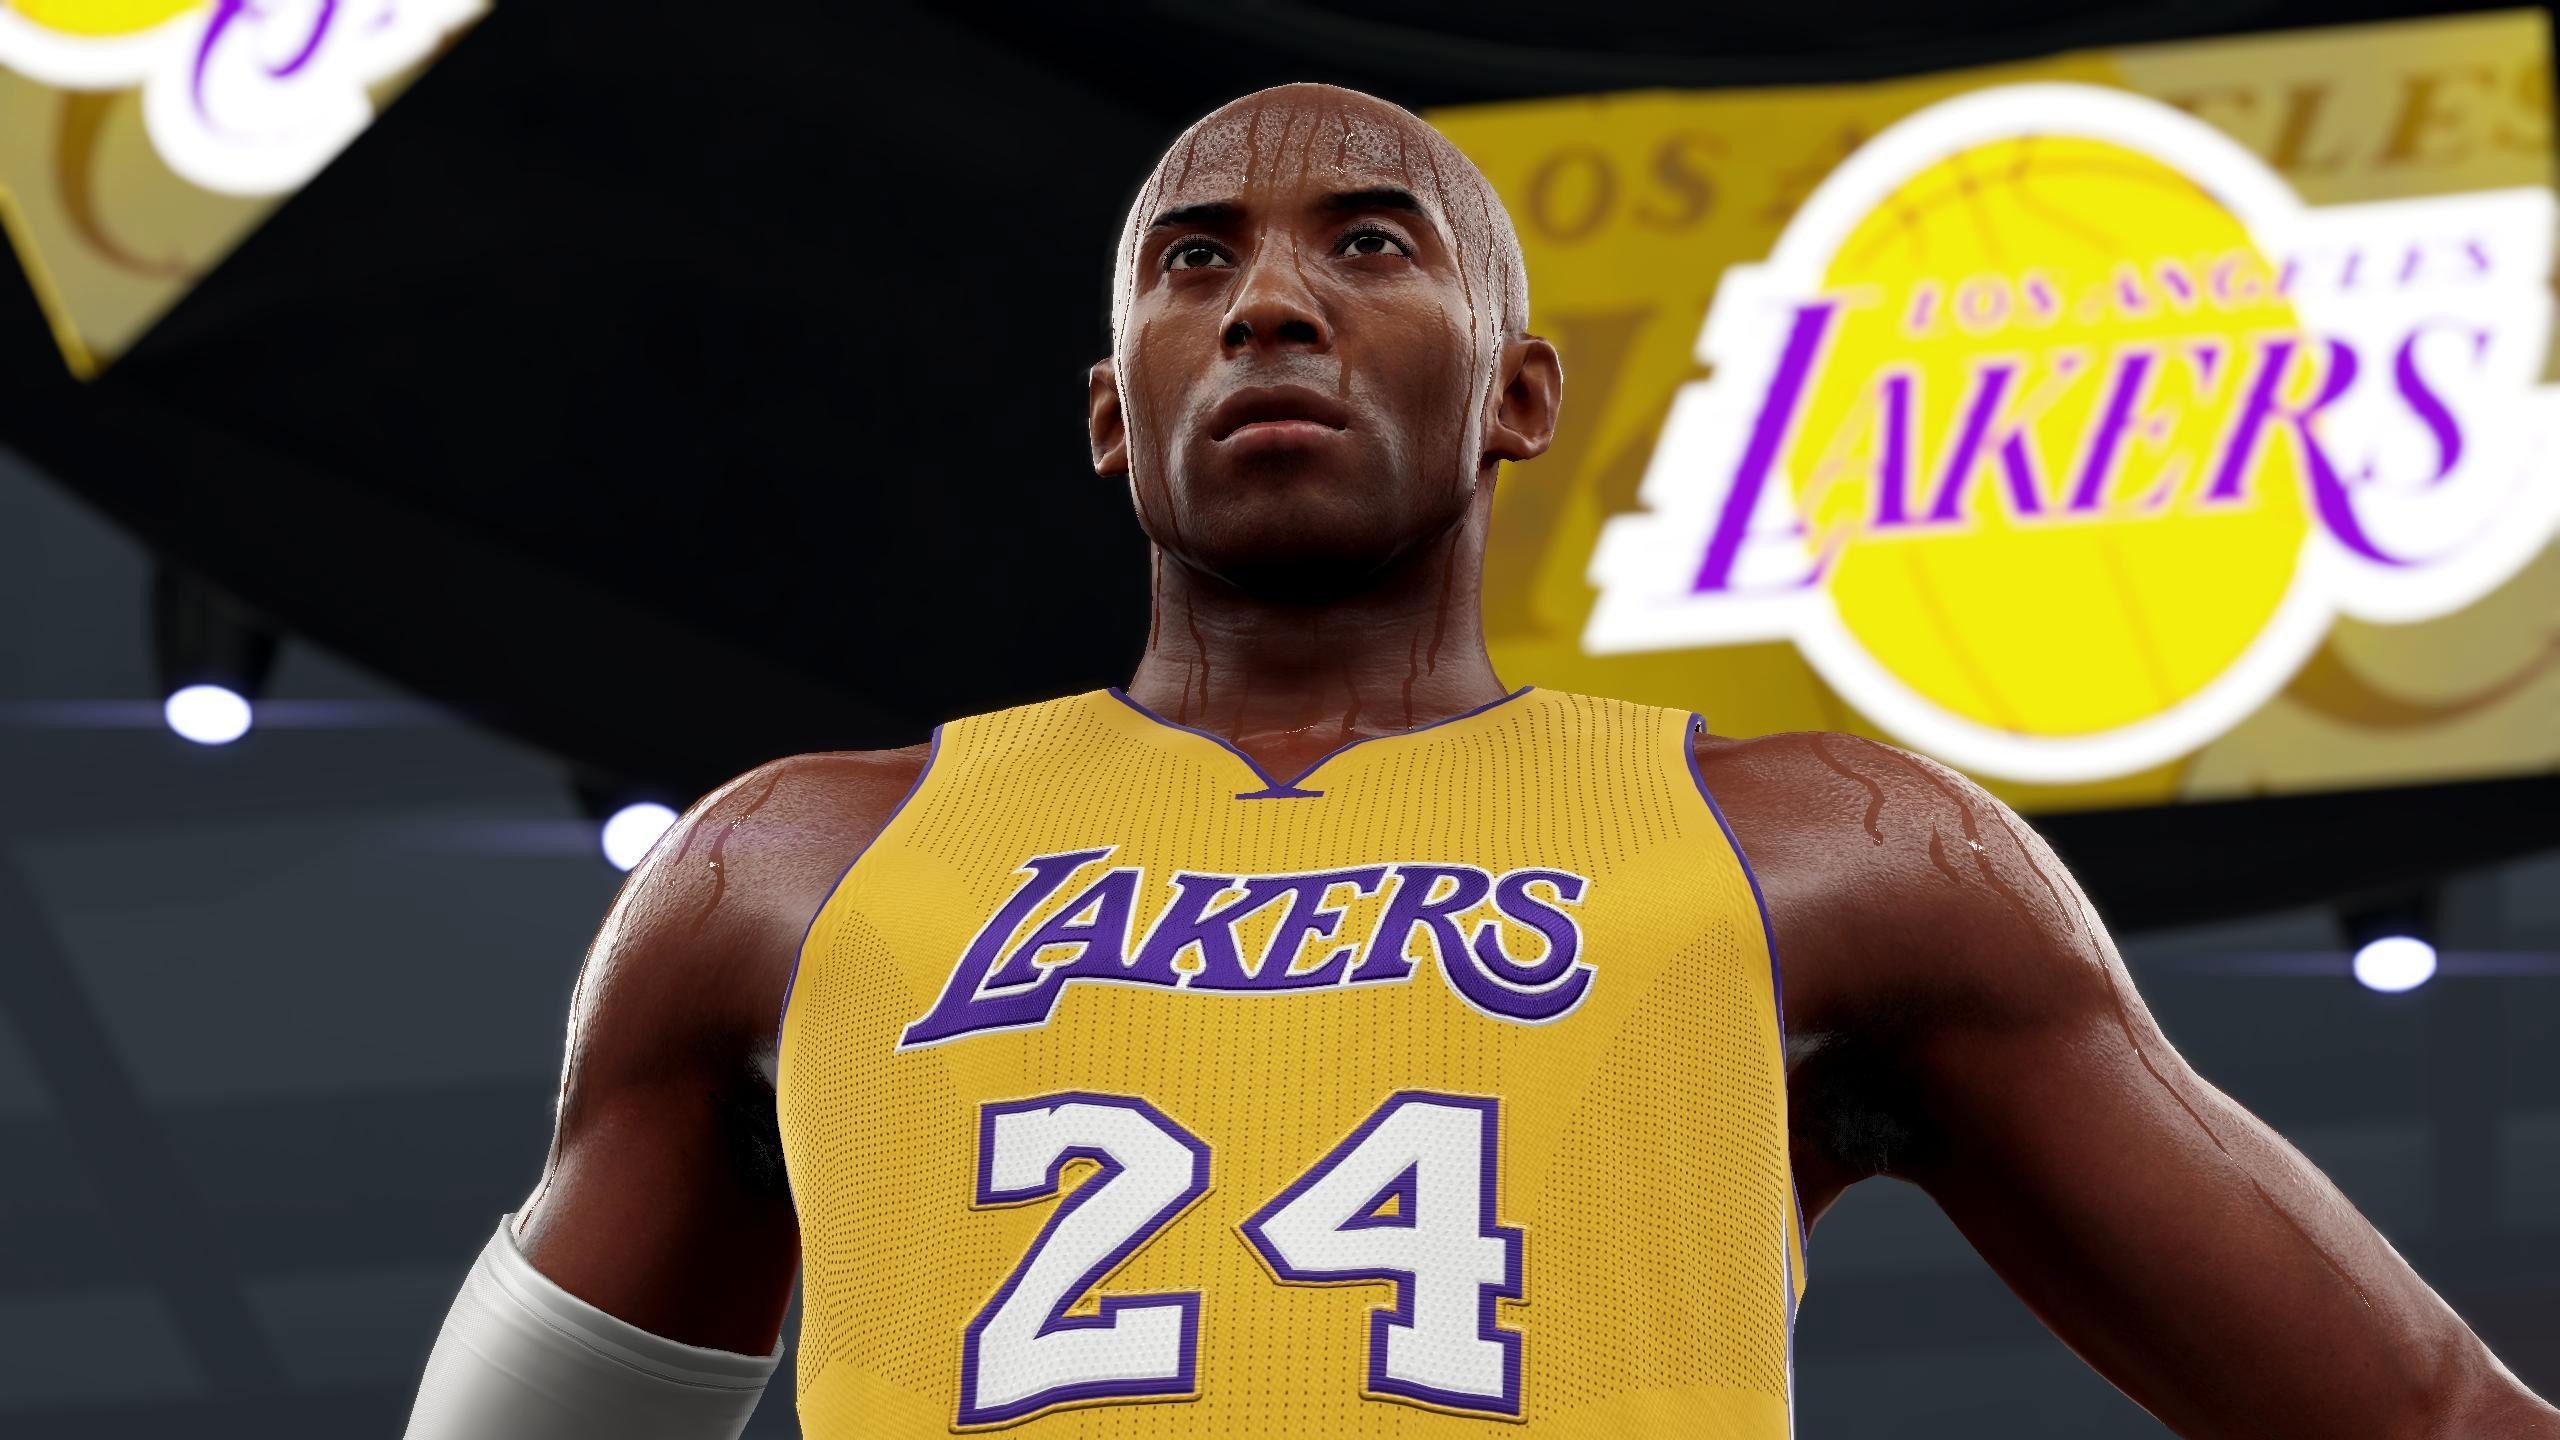 NBA 2K20 and Gamers Pay Tribute To Late Kobe Bryant